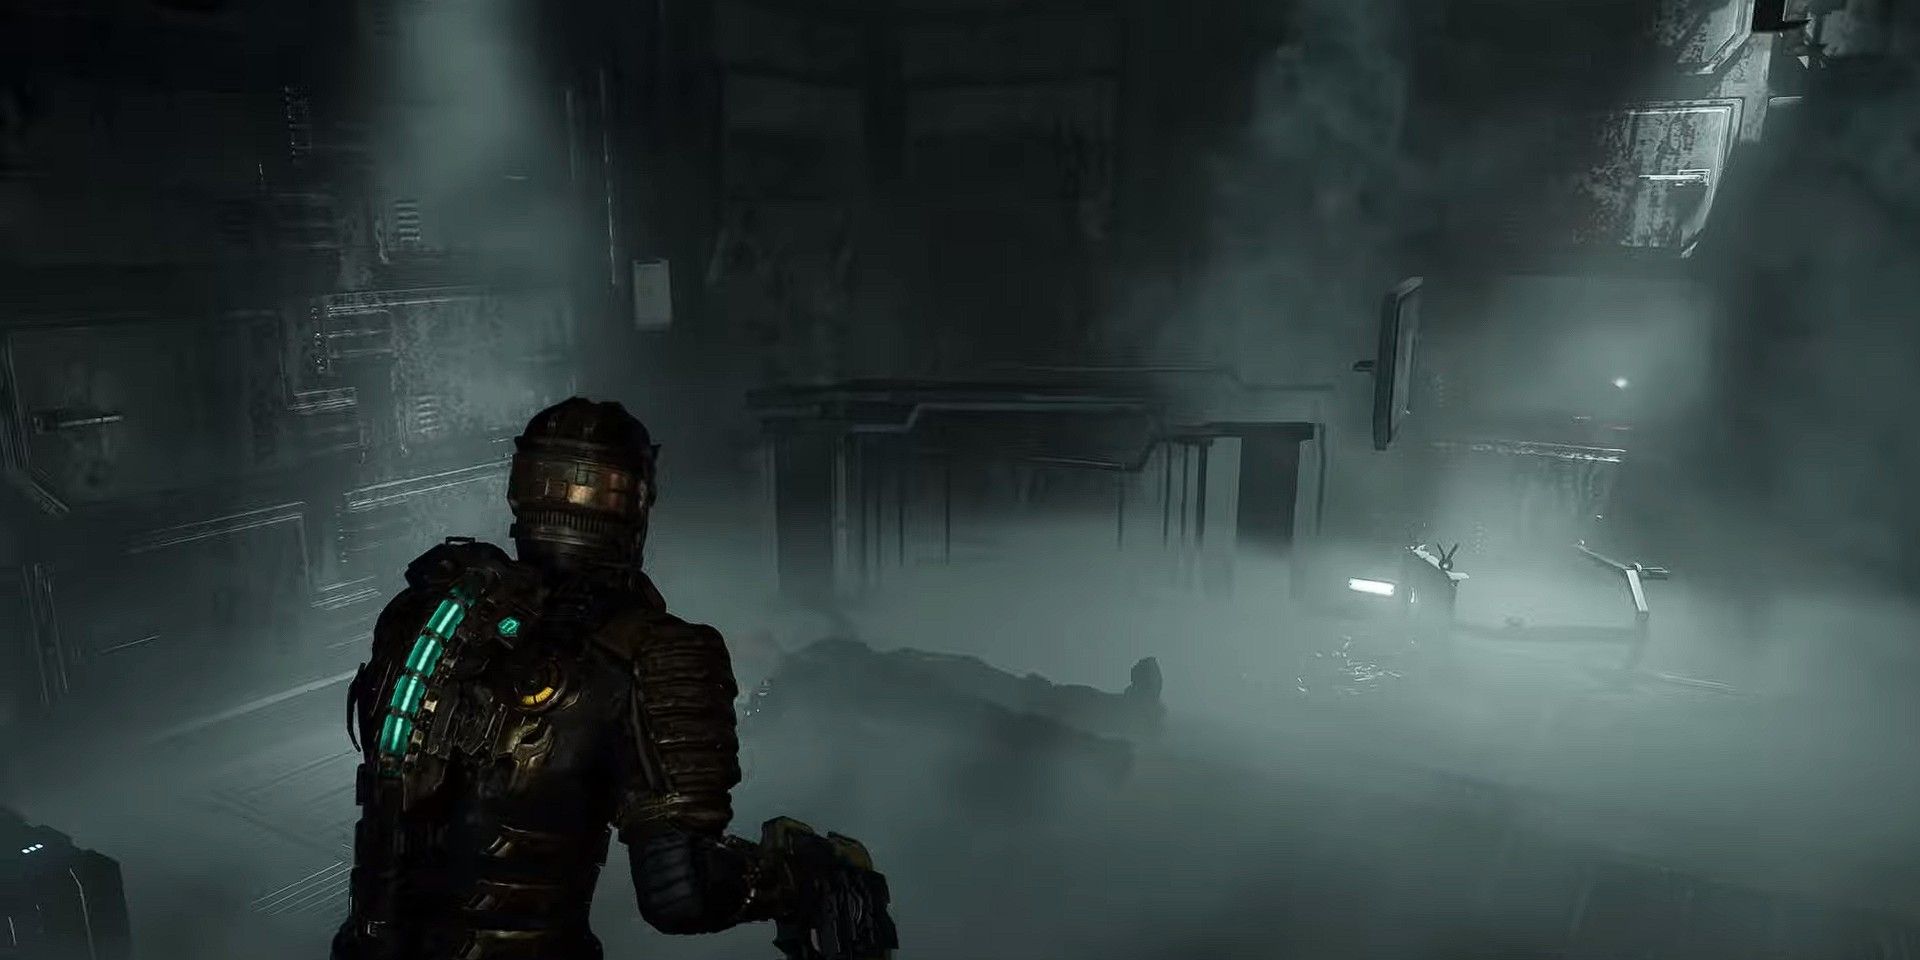 10 things you should know about 'Dead Space